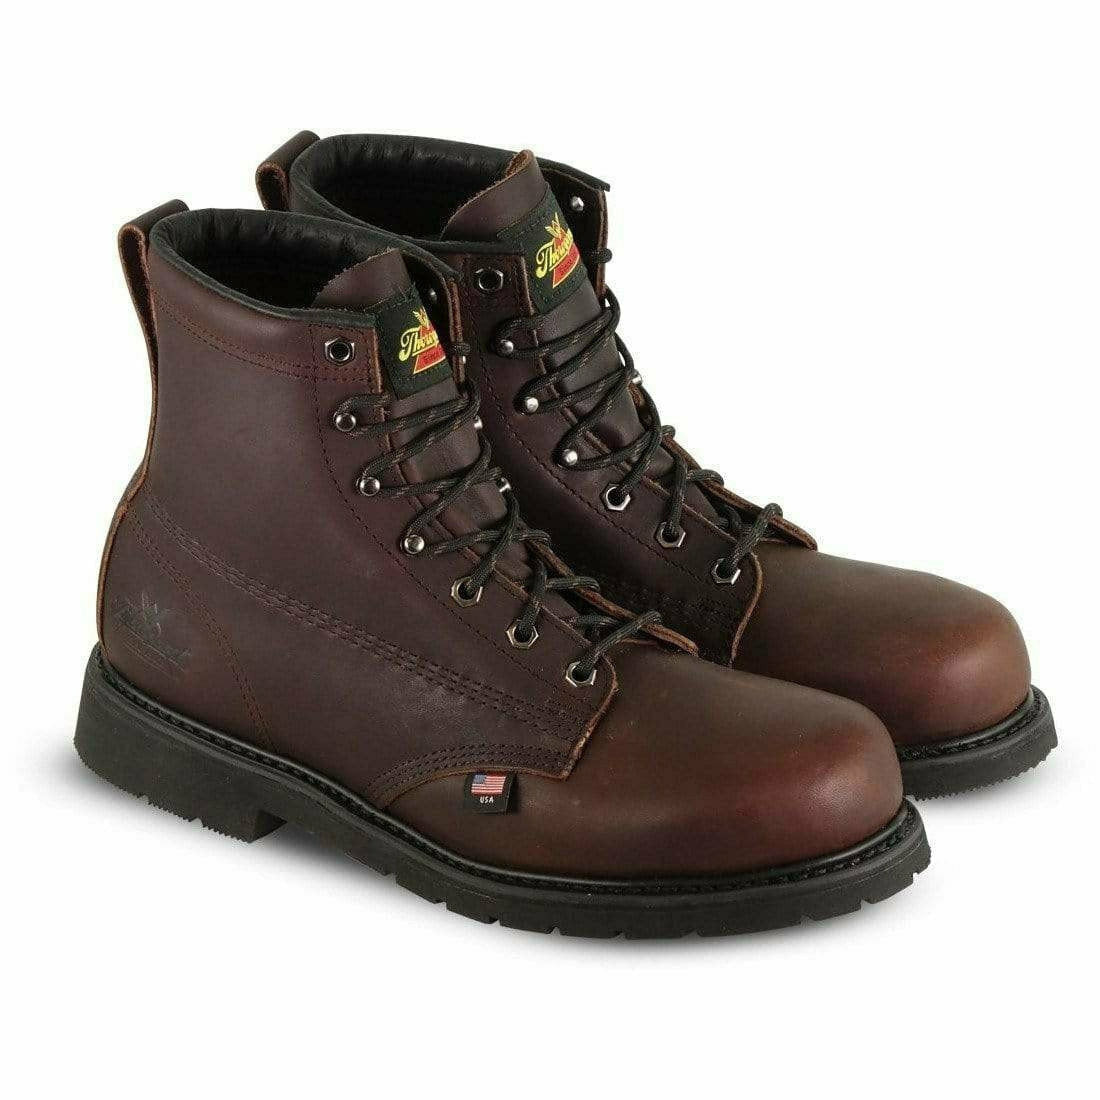 Thorogood Oil Rigger Series Safety Toe 6in Round Toe Boots | GoBros.com ...